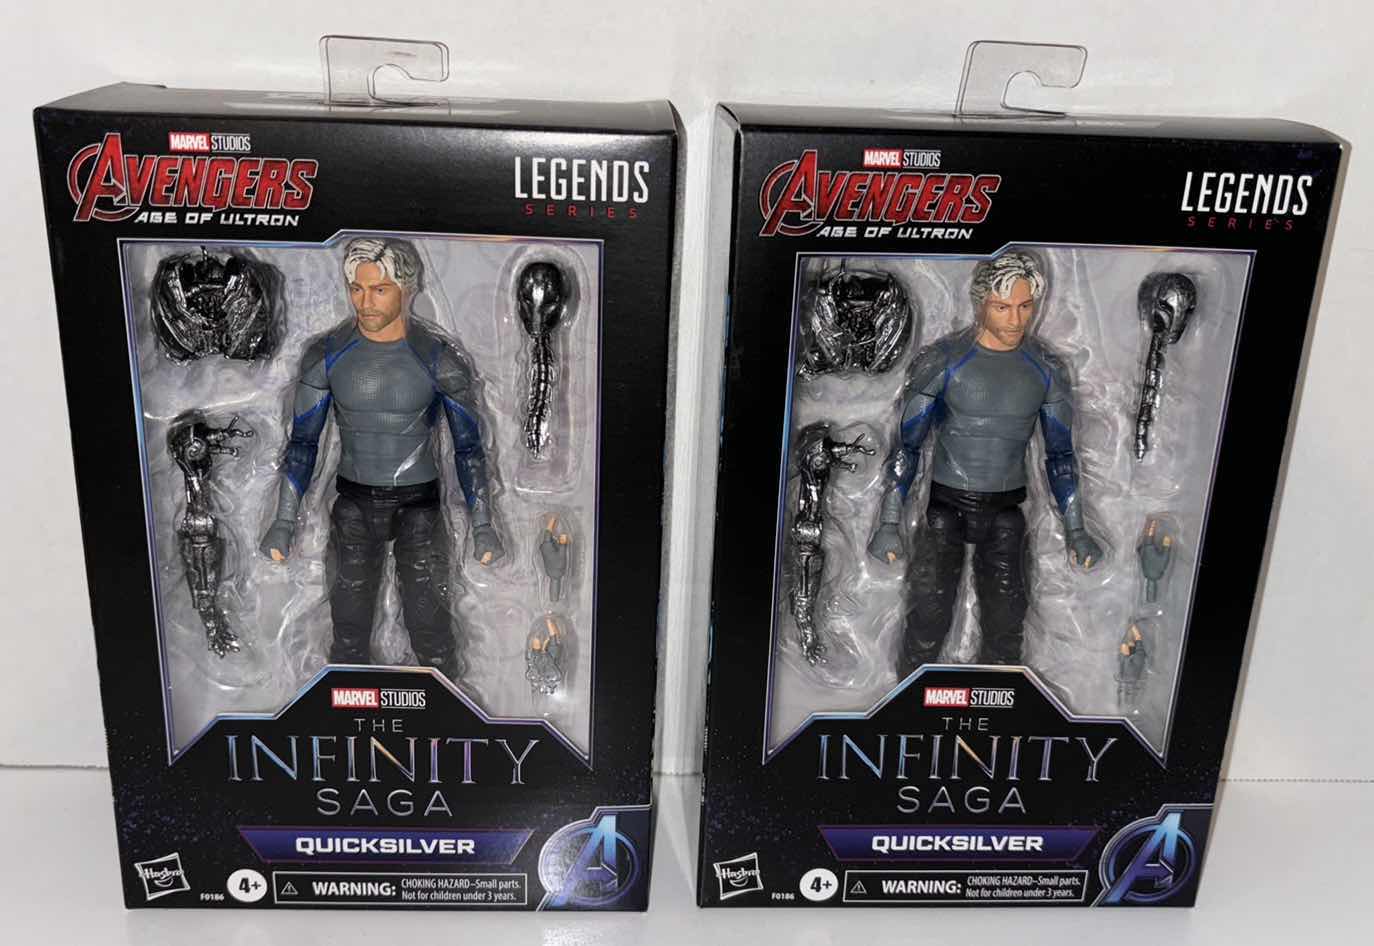 Photo 1 of NEW 2-PACK MARVEL STUDIOS AVENGERS AGE OF ULTRON LEGENDS SERIES ACTION FIGURE & ACCESSORIES, THE INFINITY SAGA “QUICKSILVER”